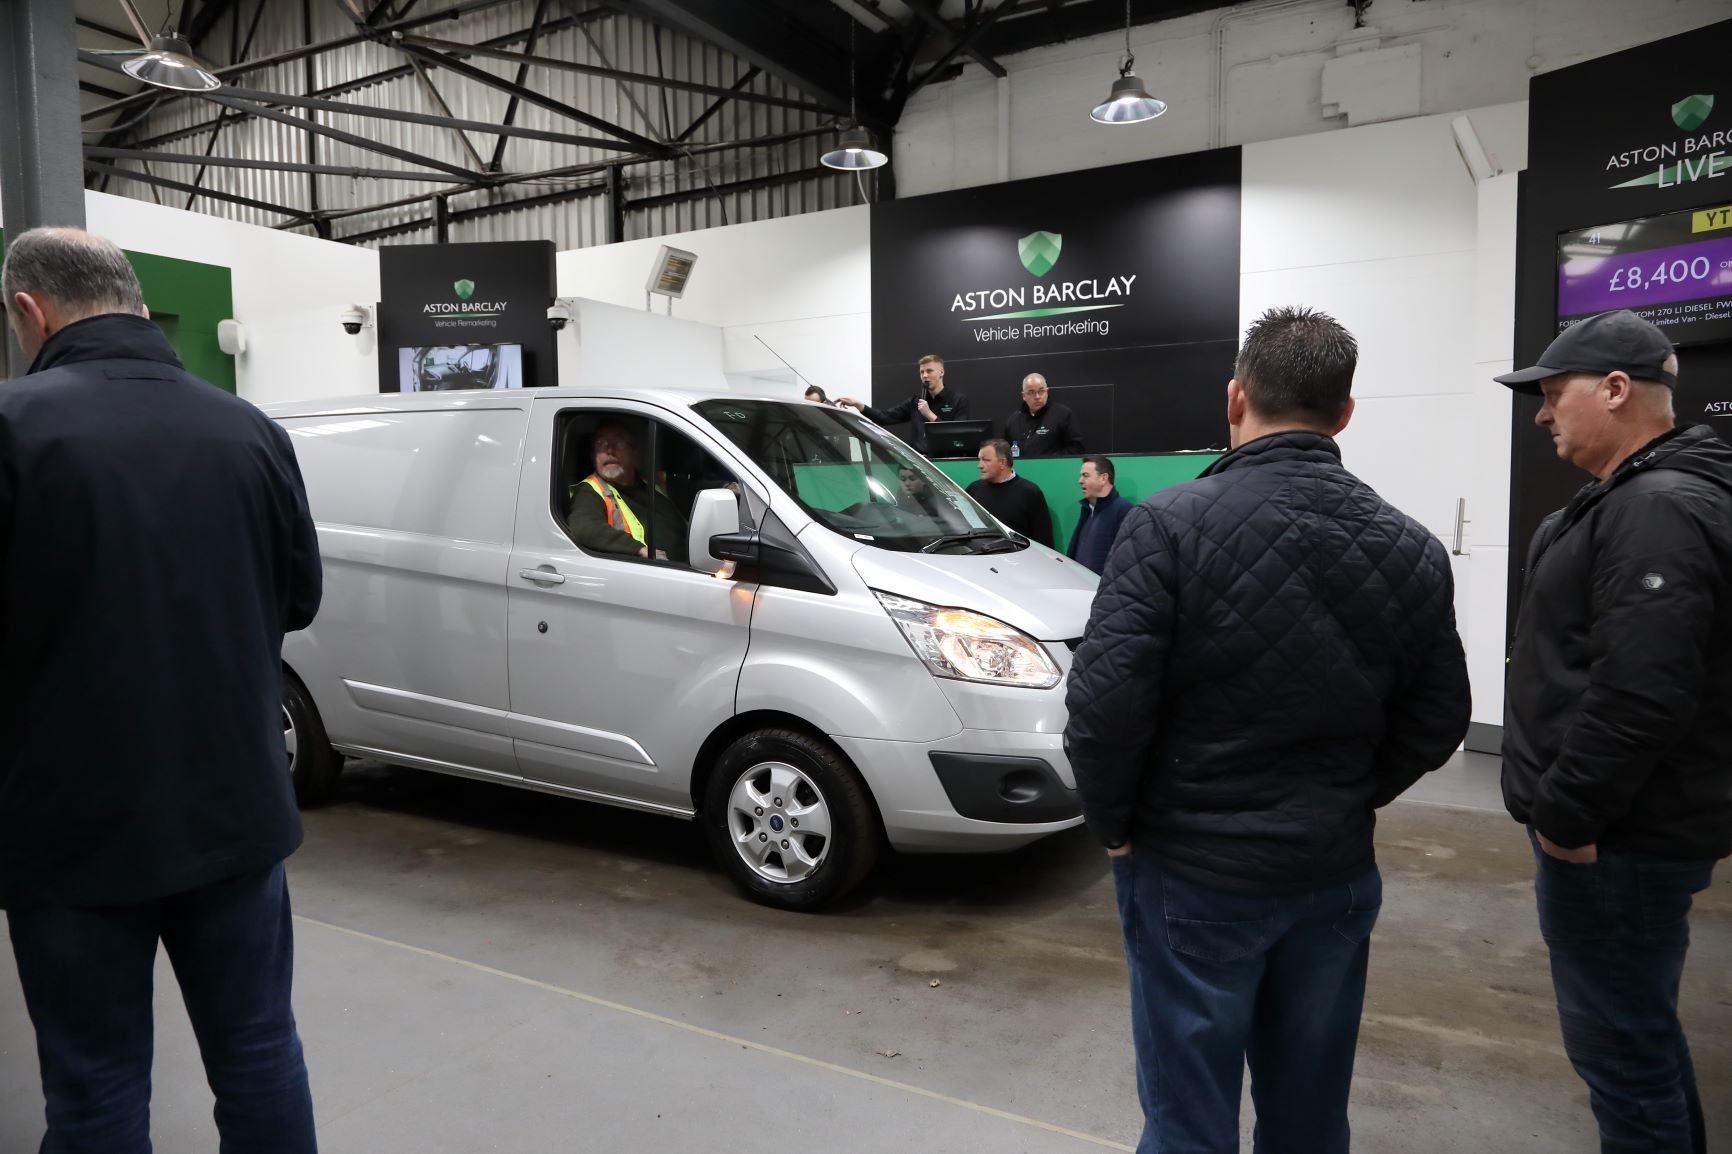 Used values up 50% in 18 months despite mileage and age increasing | Van News